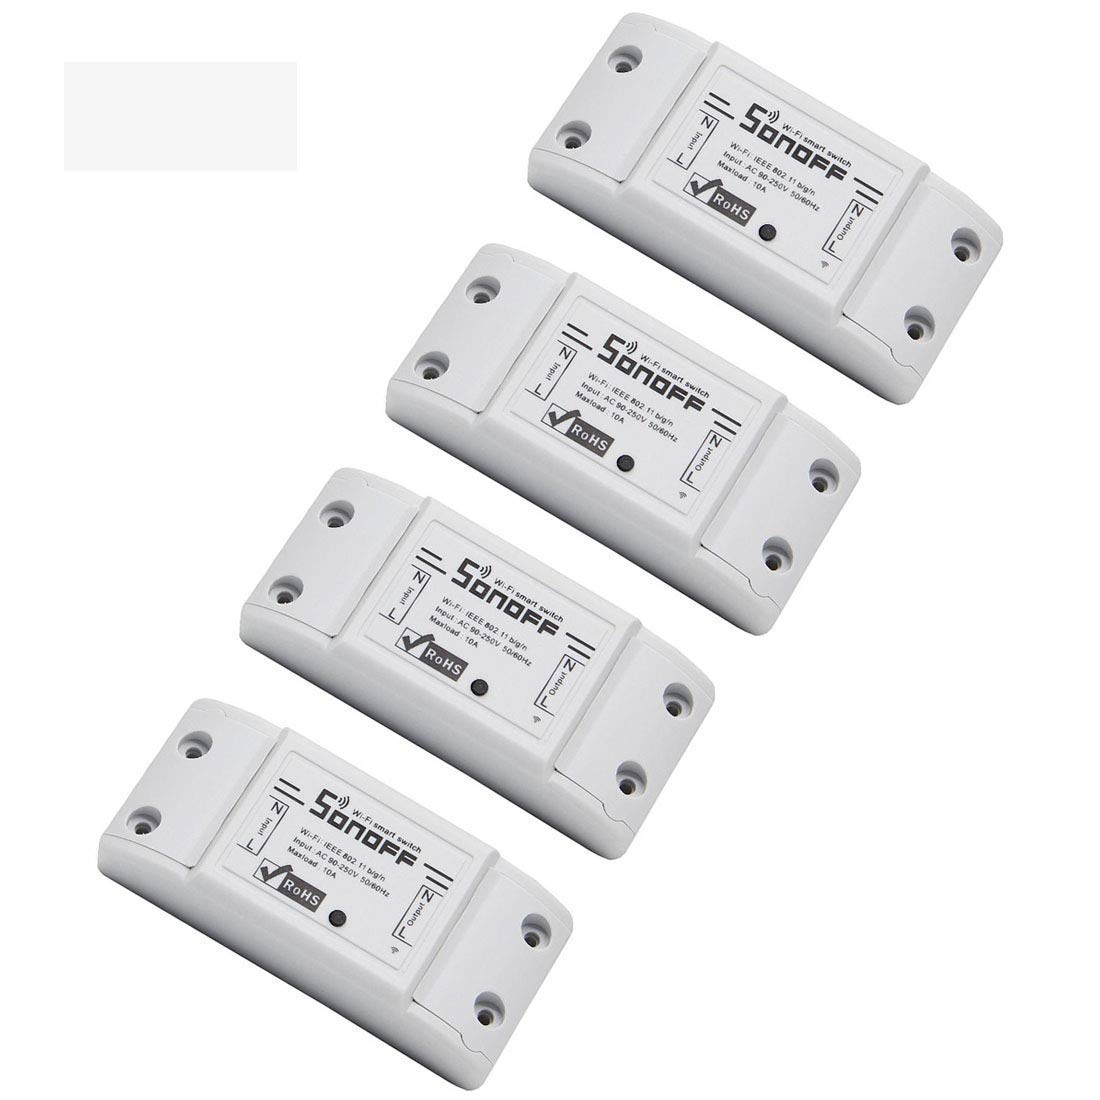 Book Cover Sonoff Basic Smart Remote Control Wifi Switch Compatible with Alexa DIY Your Home via Iphone Android App (Sonoff 4Pack)